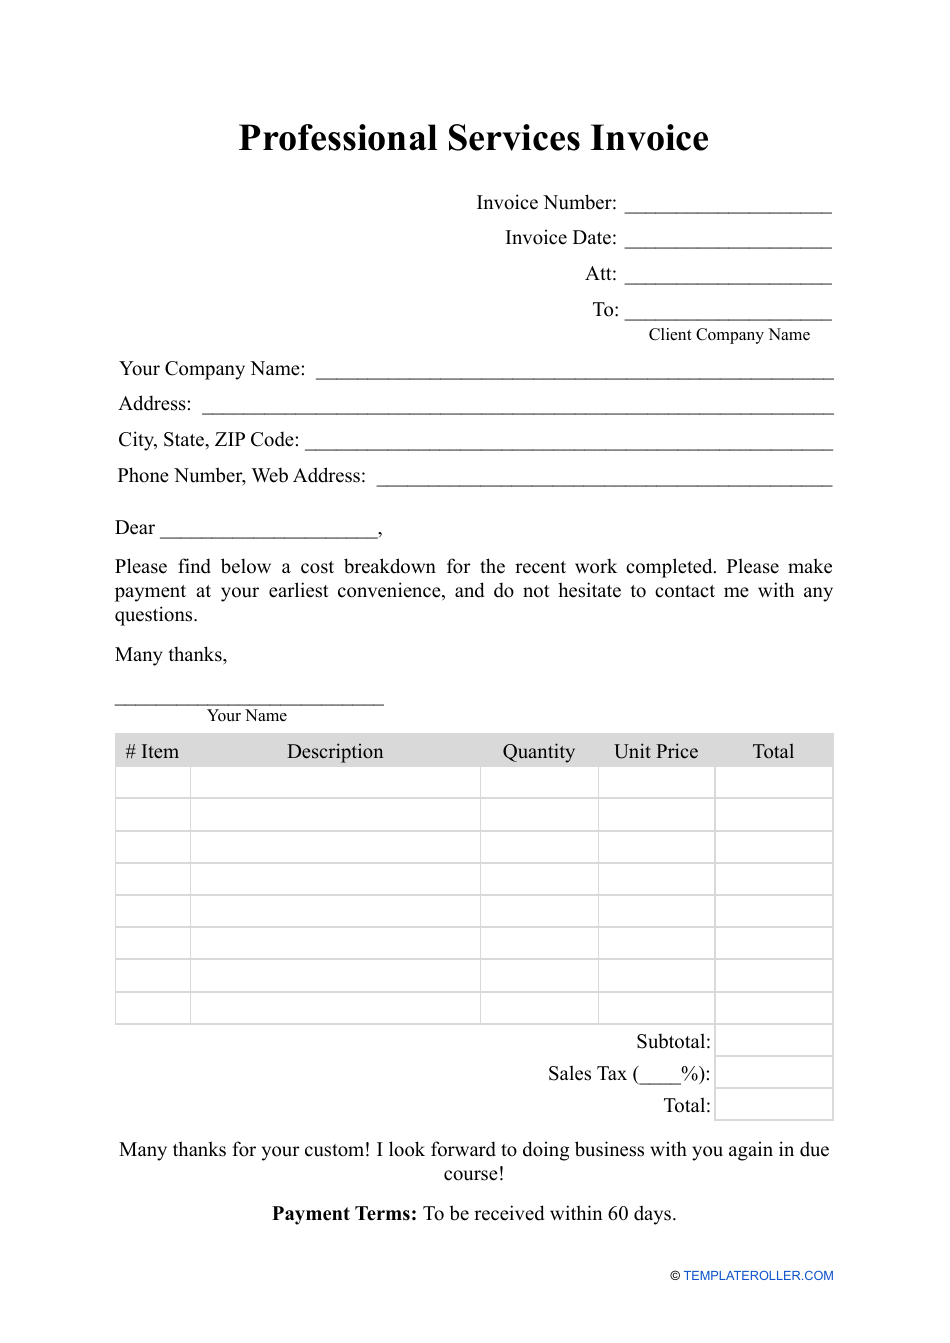 professional services invoice template